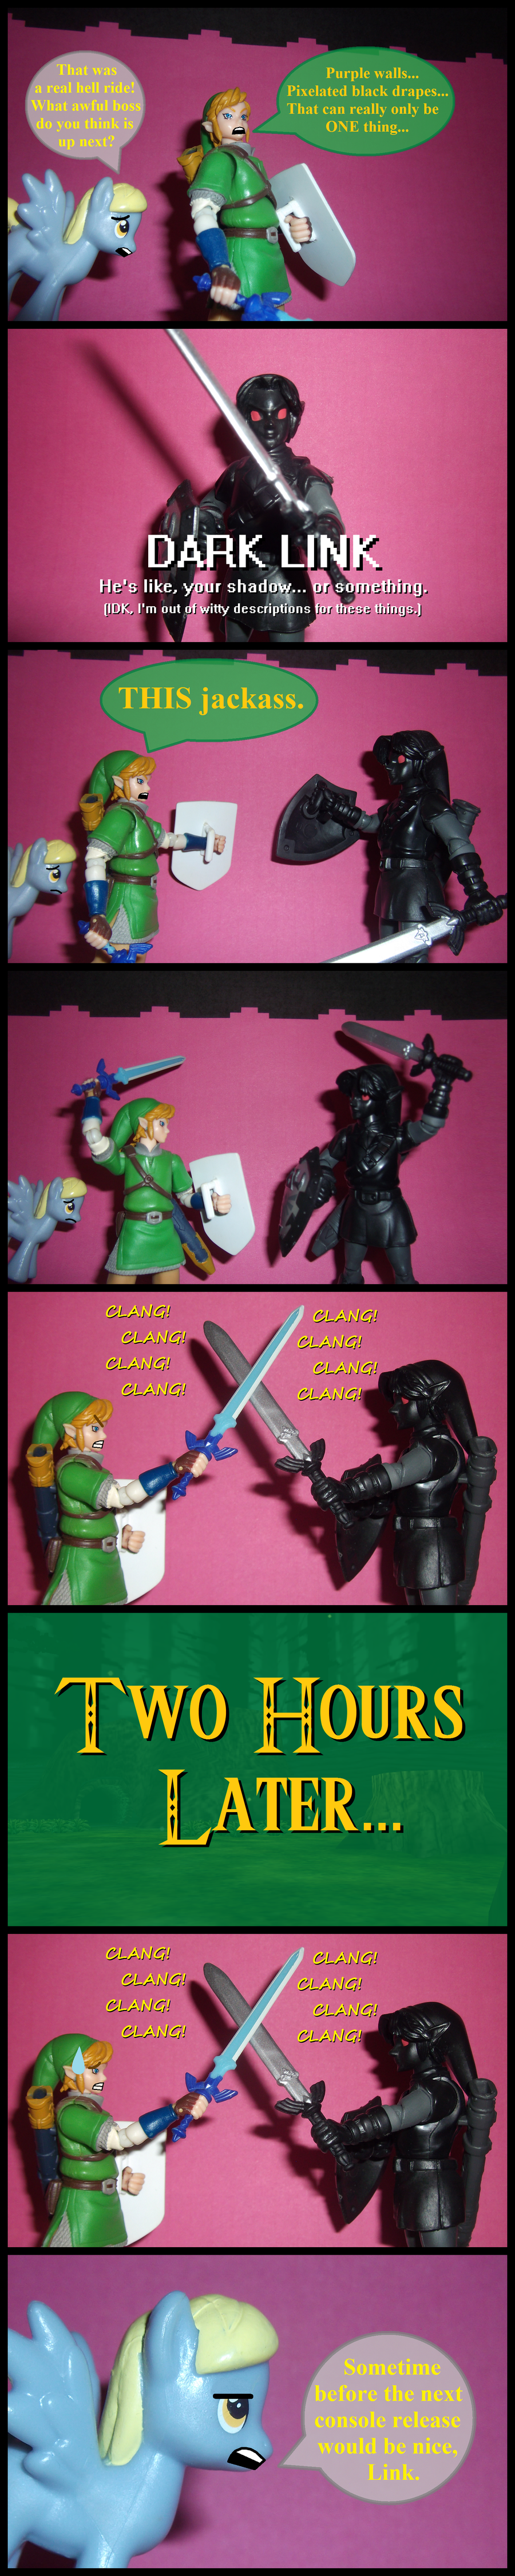 the_legend_of_zelda__pain_in_the_ass__pt__38__by_therockinstallion-db2ao3a.png